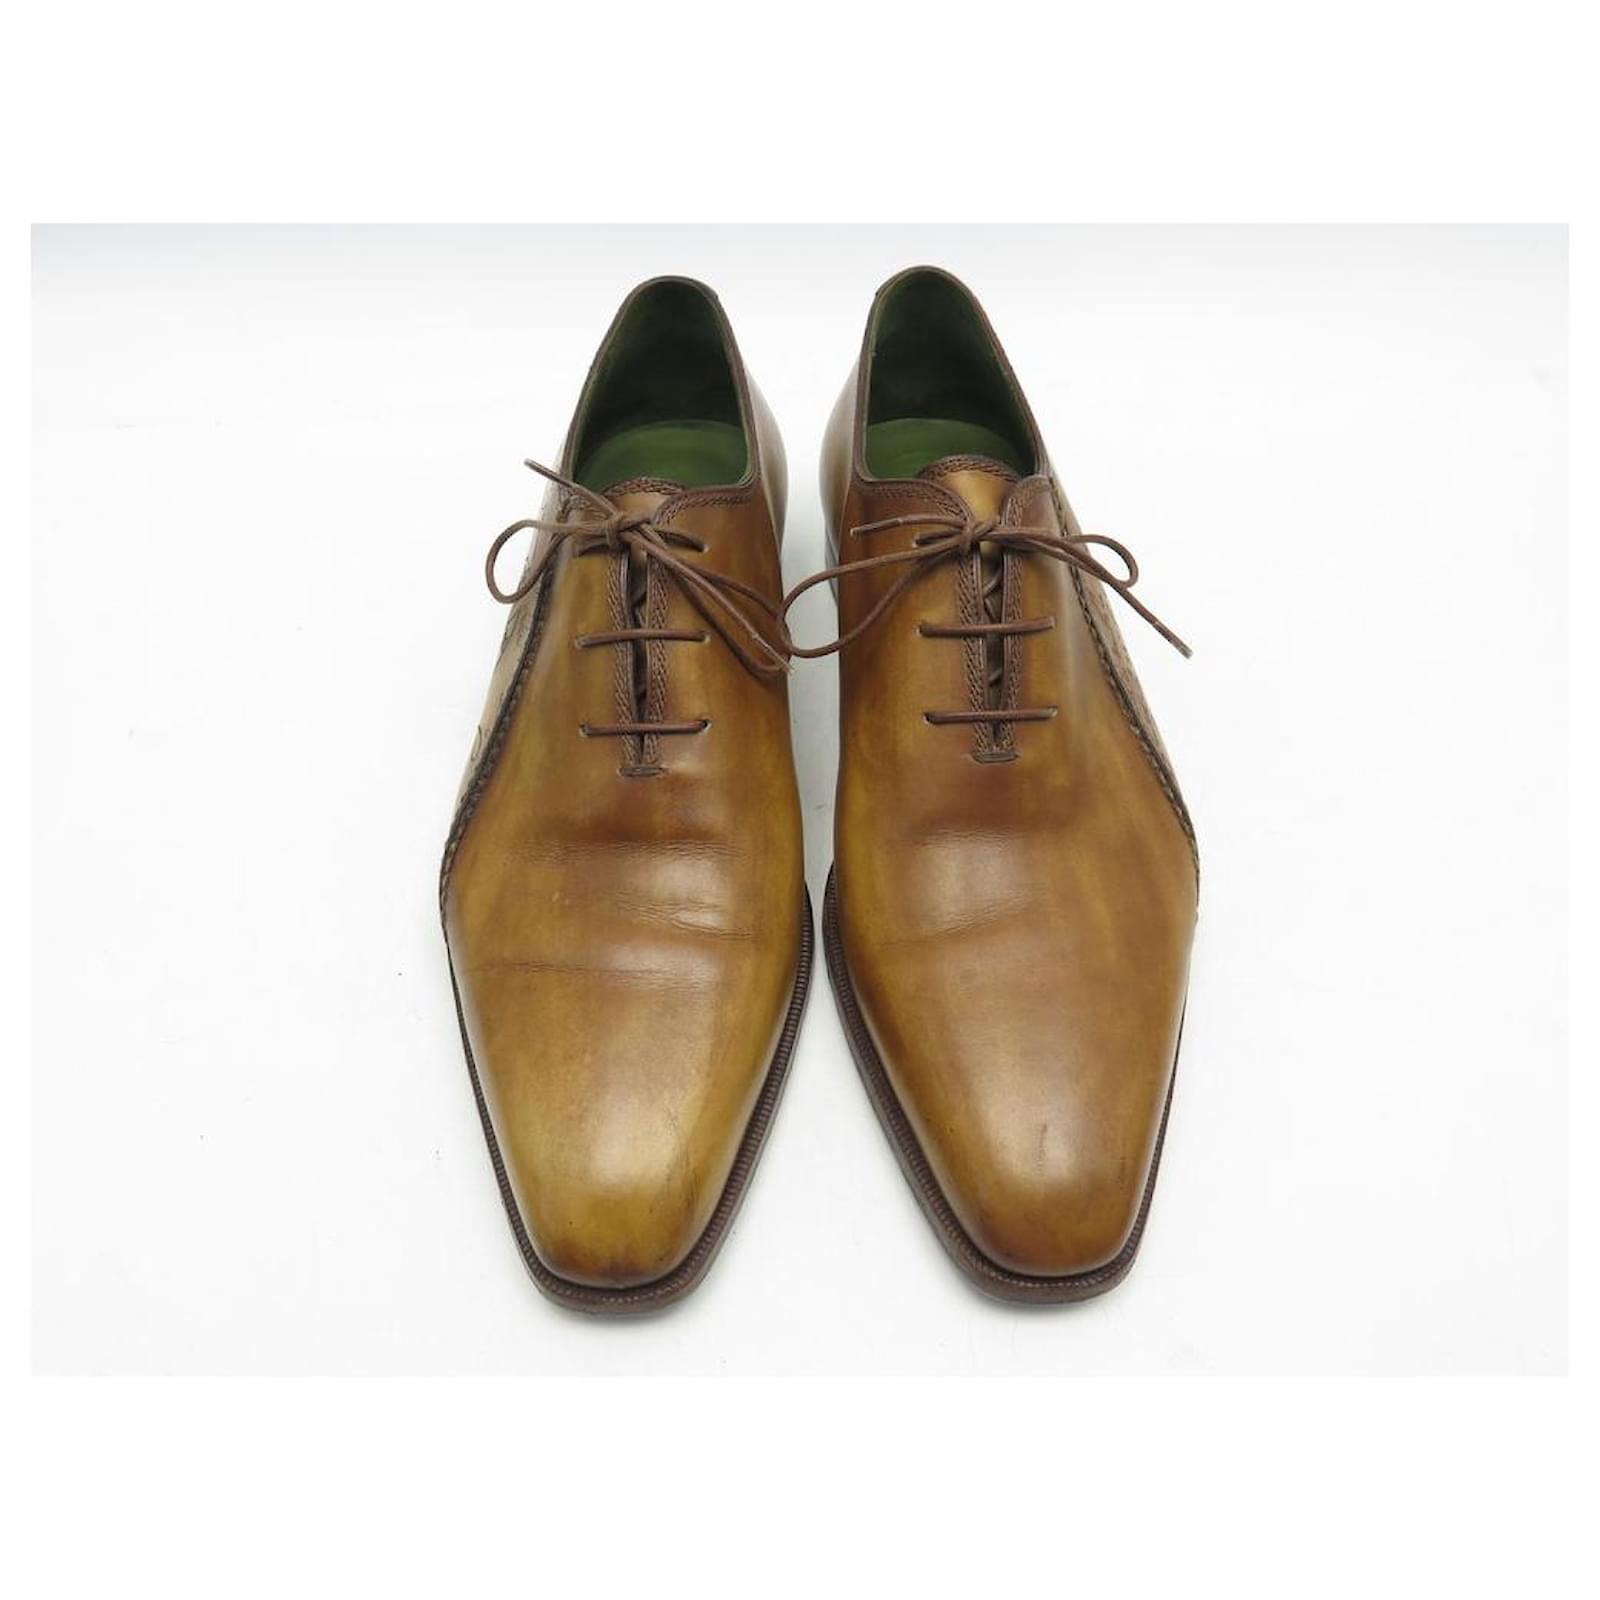 BERLUTI SHOES RICHELIEU ALESSANDRO SCRITTO 9 43 PATINA LEATHER SHOES